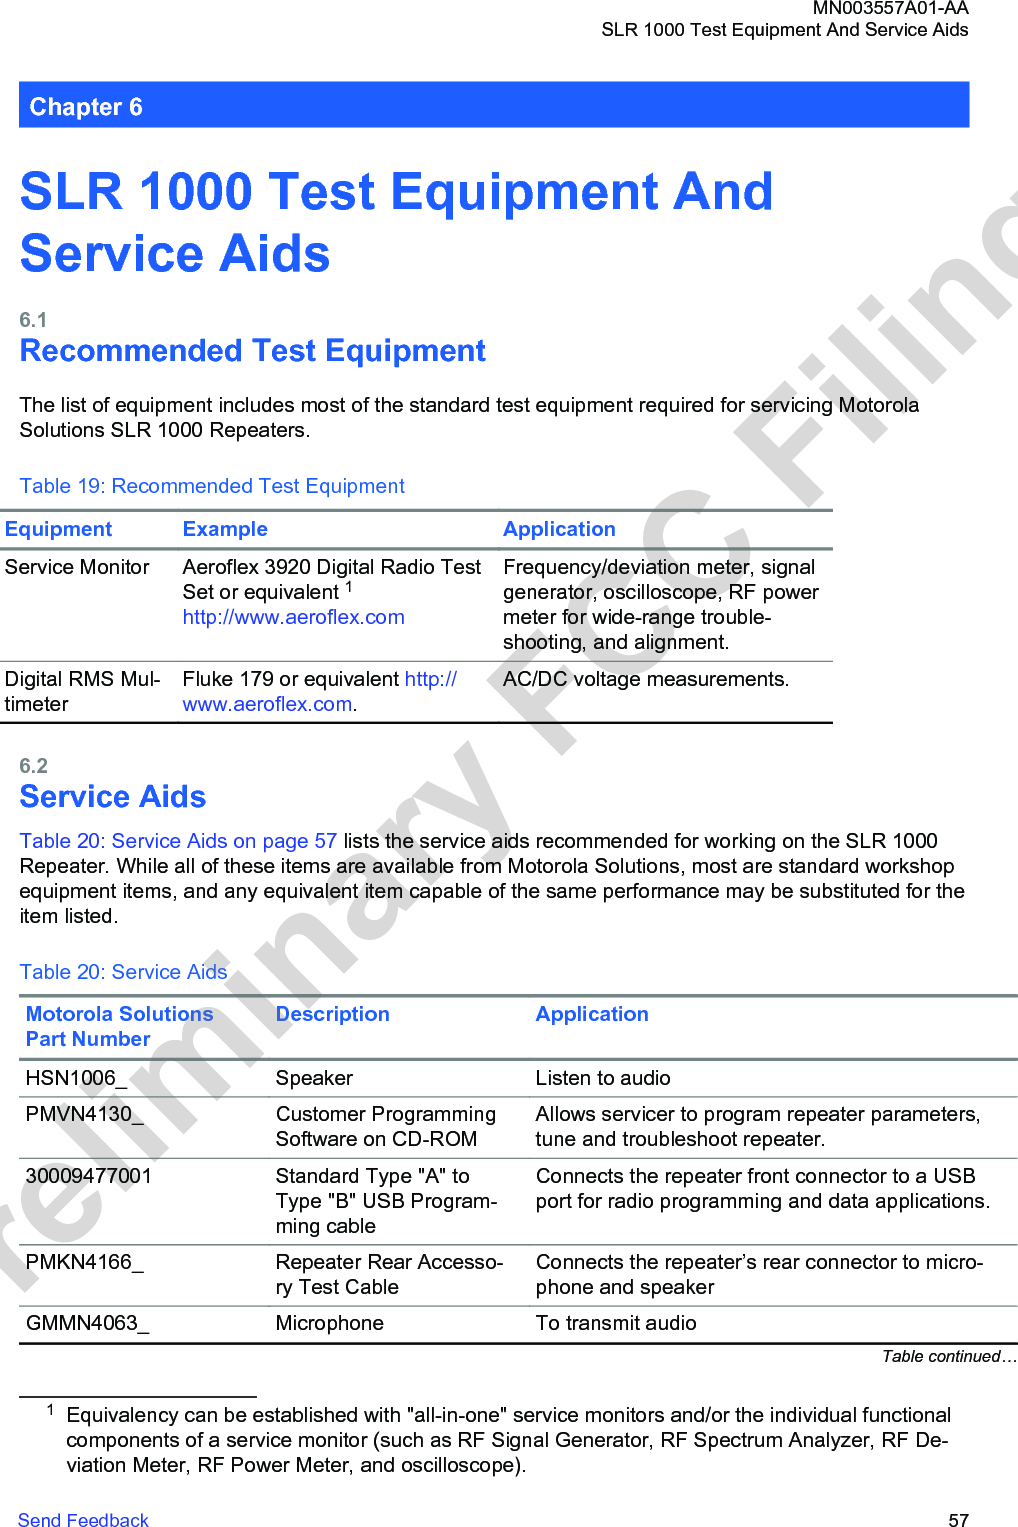 Chapter 6SLR 1000 Test Equipment AndService Aids6.1Recommended Test EquipmentThe list of equipment includes most of the standard test equipment required for servicing MotorolaSolutions SLR 1000 Repeaters.Table 19: Recommended Test EquipmentEquipment Example ApplicationService Monitor Aeroflex 3920 Digital Radio TestSet or equivalent 1http://www.aeroflex.comFrequency/deviation meter, signalgenerator, oscilloscope, RF powermeter for wide-range trouble-shooting, and alignment.Digital RMS Mul-timeterFluke 179 or equivalent http://www.aeroflex.com.AC/DC voltage measurements.6.2Service AidsTable 20: Service Aids on page 57 lists the service aids recommended for working on the SLR 1000Repeater. While all of these items are available from Motorola Solutions, most are standard workshopequipment items, and any equivalent item capable of the same performance may be substituted for theitem listed.Table 20: Service AidsMotorola SolutionsPart NumberDescription ApplicationHSN1006_ Speaker Listen to audioPMVN4130_ Customer ProgrammingSoftware on CD-ROMAllows servicer to program repeater parameters,tune and troubleshoot repeater.30009477001 Standard Type &quot;A&quot; toType &quot;B&quot; USB Program-ming cableConnects the repeater front connector to a USBport for radio programming and data applications.PMKN4166_ Repeater Rear Accesso-ry Test CableConnects the repeater’s rear connector to micro-phone and speakerGMMN4063_ Microphone To transmit audioTable continued…1Equivalency can be established with &quot;all-in-one&quot; service monitors and/or the individual functionalcomponents of a service monitor (such as RF Signal Generator, RF Spectrum Analyzer, RF De-viation Meter, RF Power Meter, and oscilloscope).MN003557A01-AASLR 1000 Test Equipment And Service AidsSend Feedback   57Preliminary FCC Filing